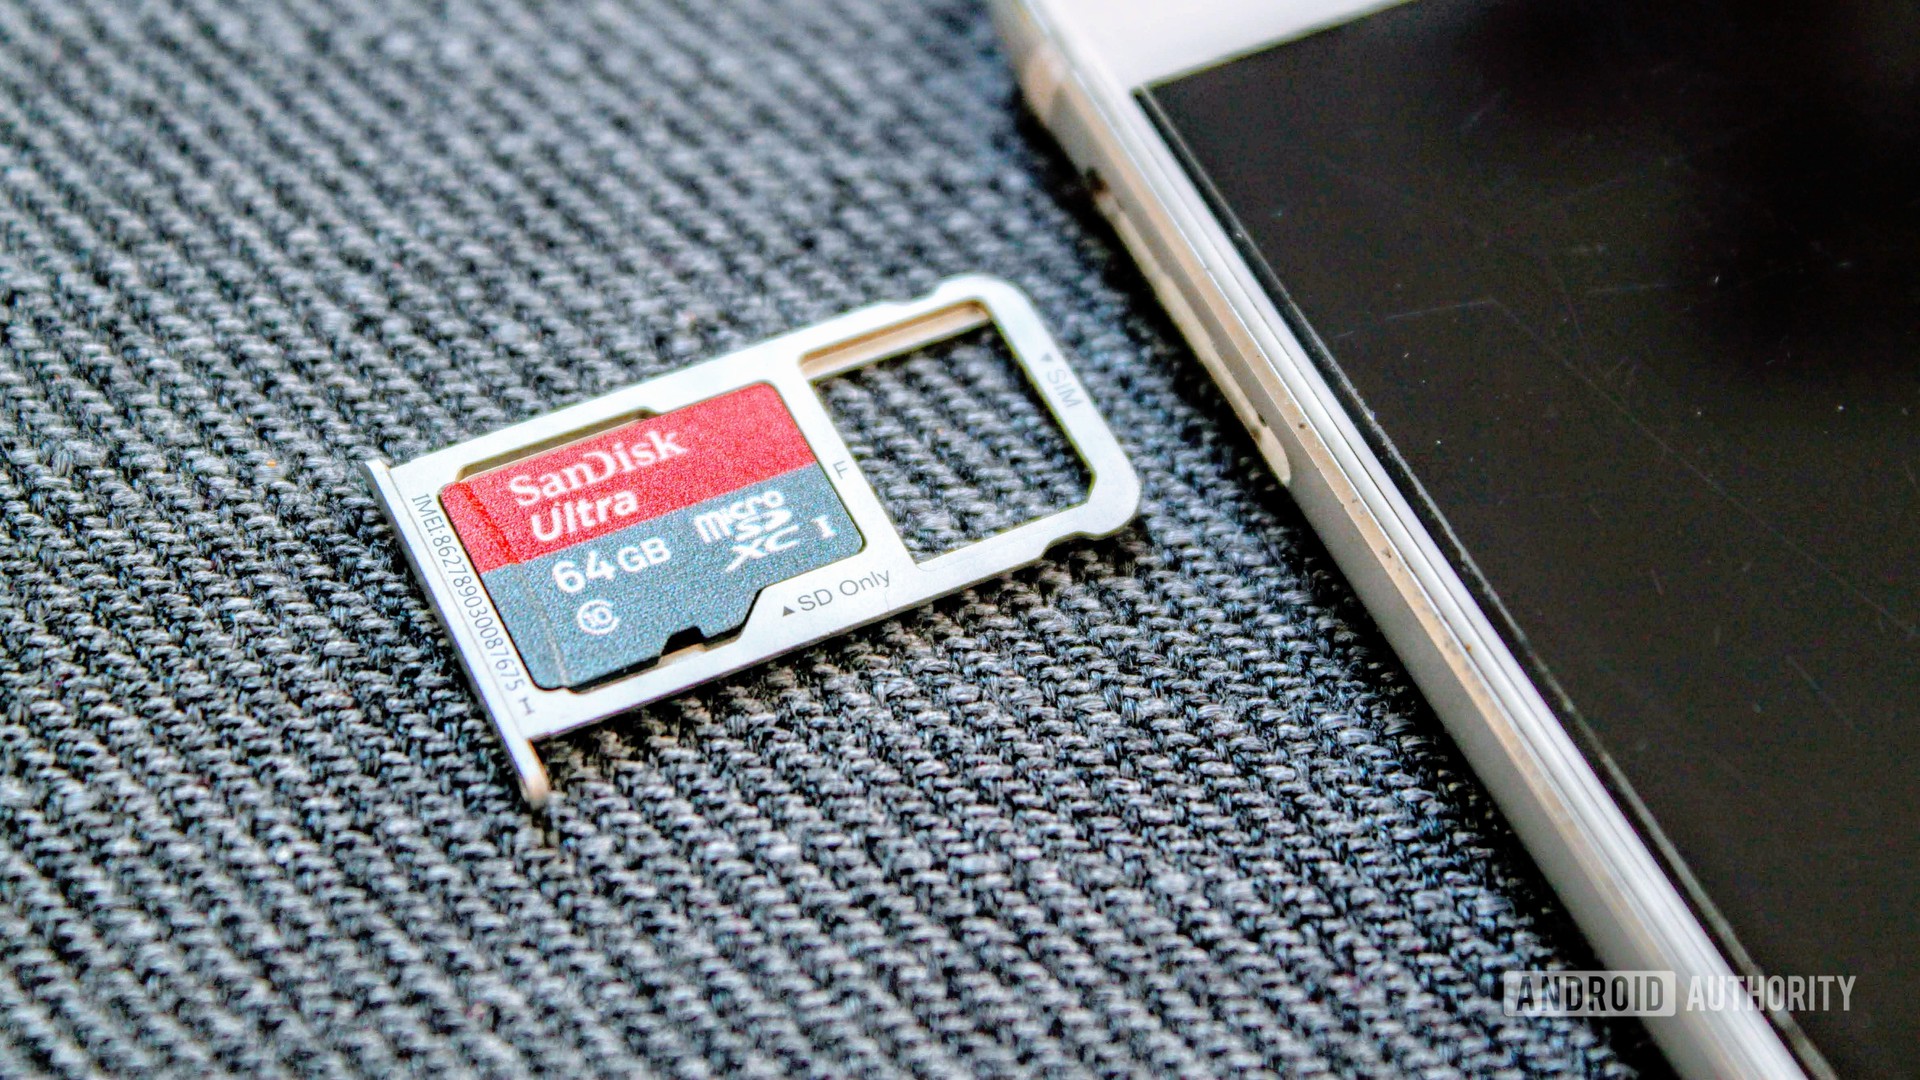 phones with expandable memory - How to move apps to SD card